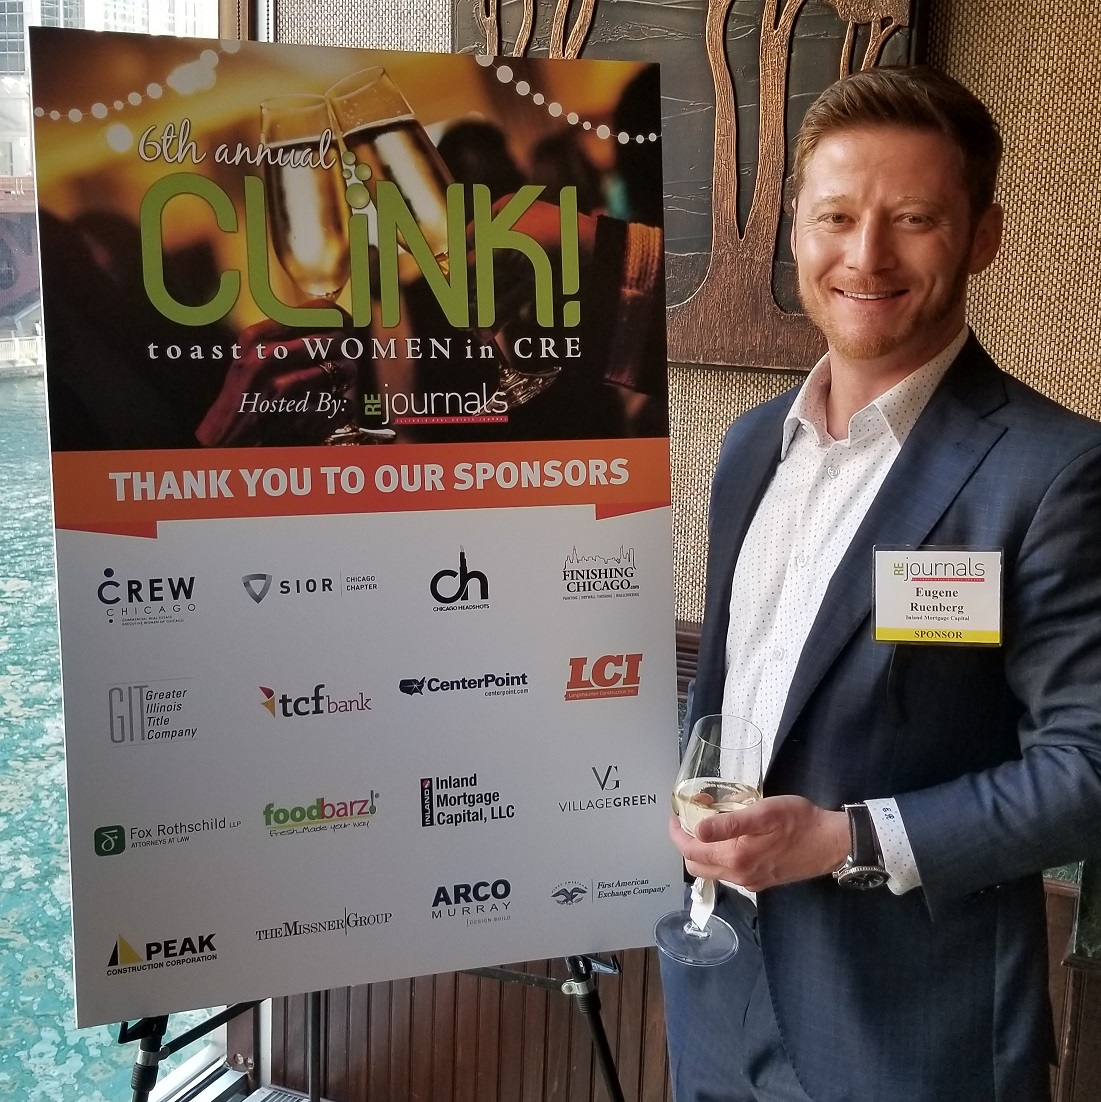 In celebration of the women in real estate, Eugene Rutenberg attended the 6th Annual CLINK Toast to Women networking event, held at Smith & Wollensky in downtown Chicago. 